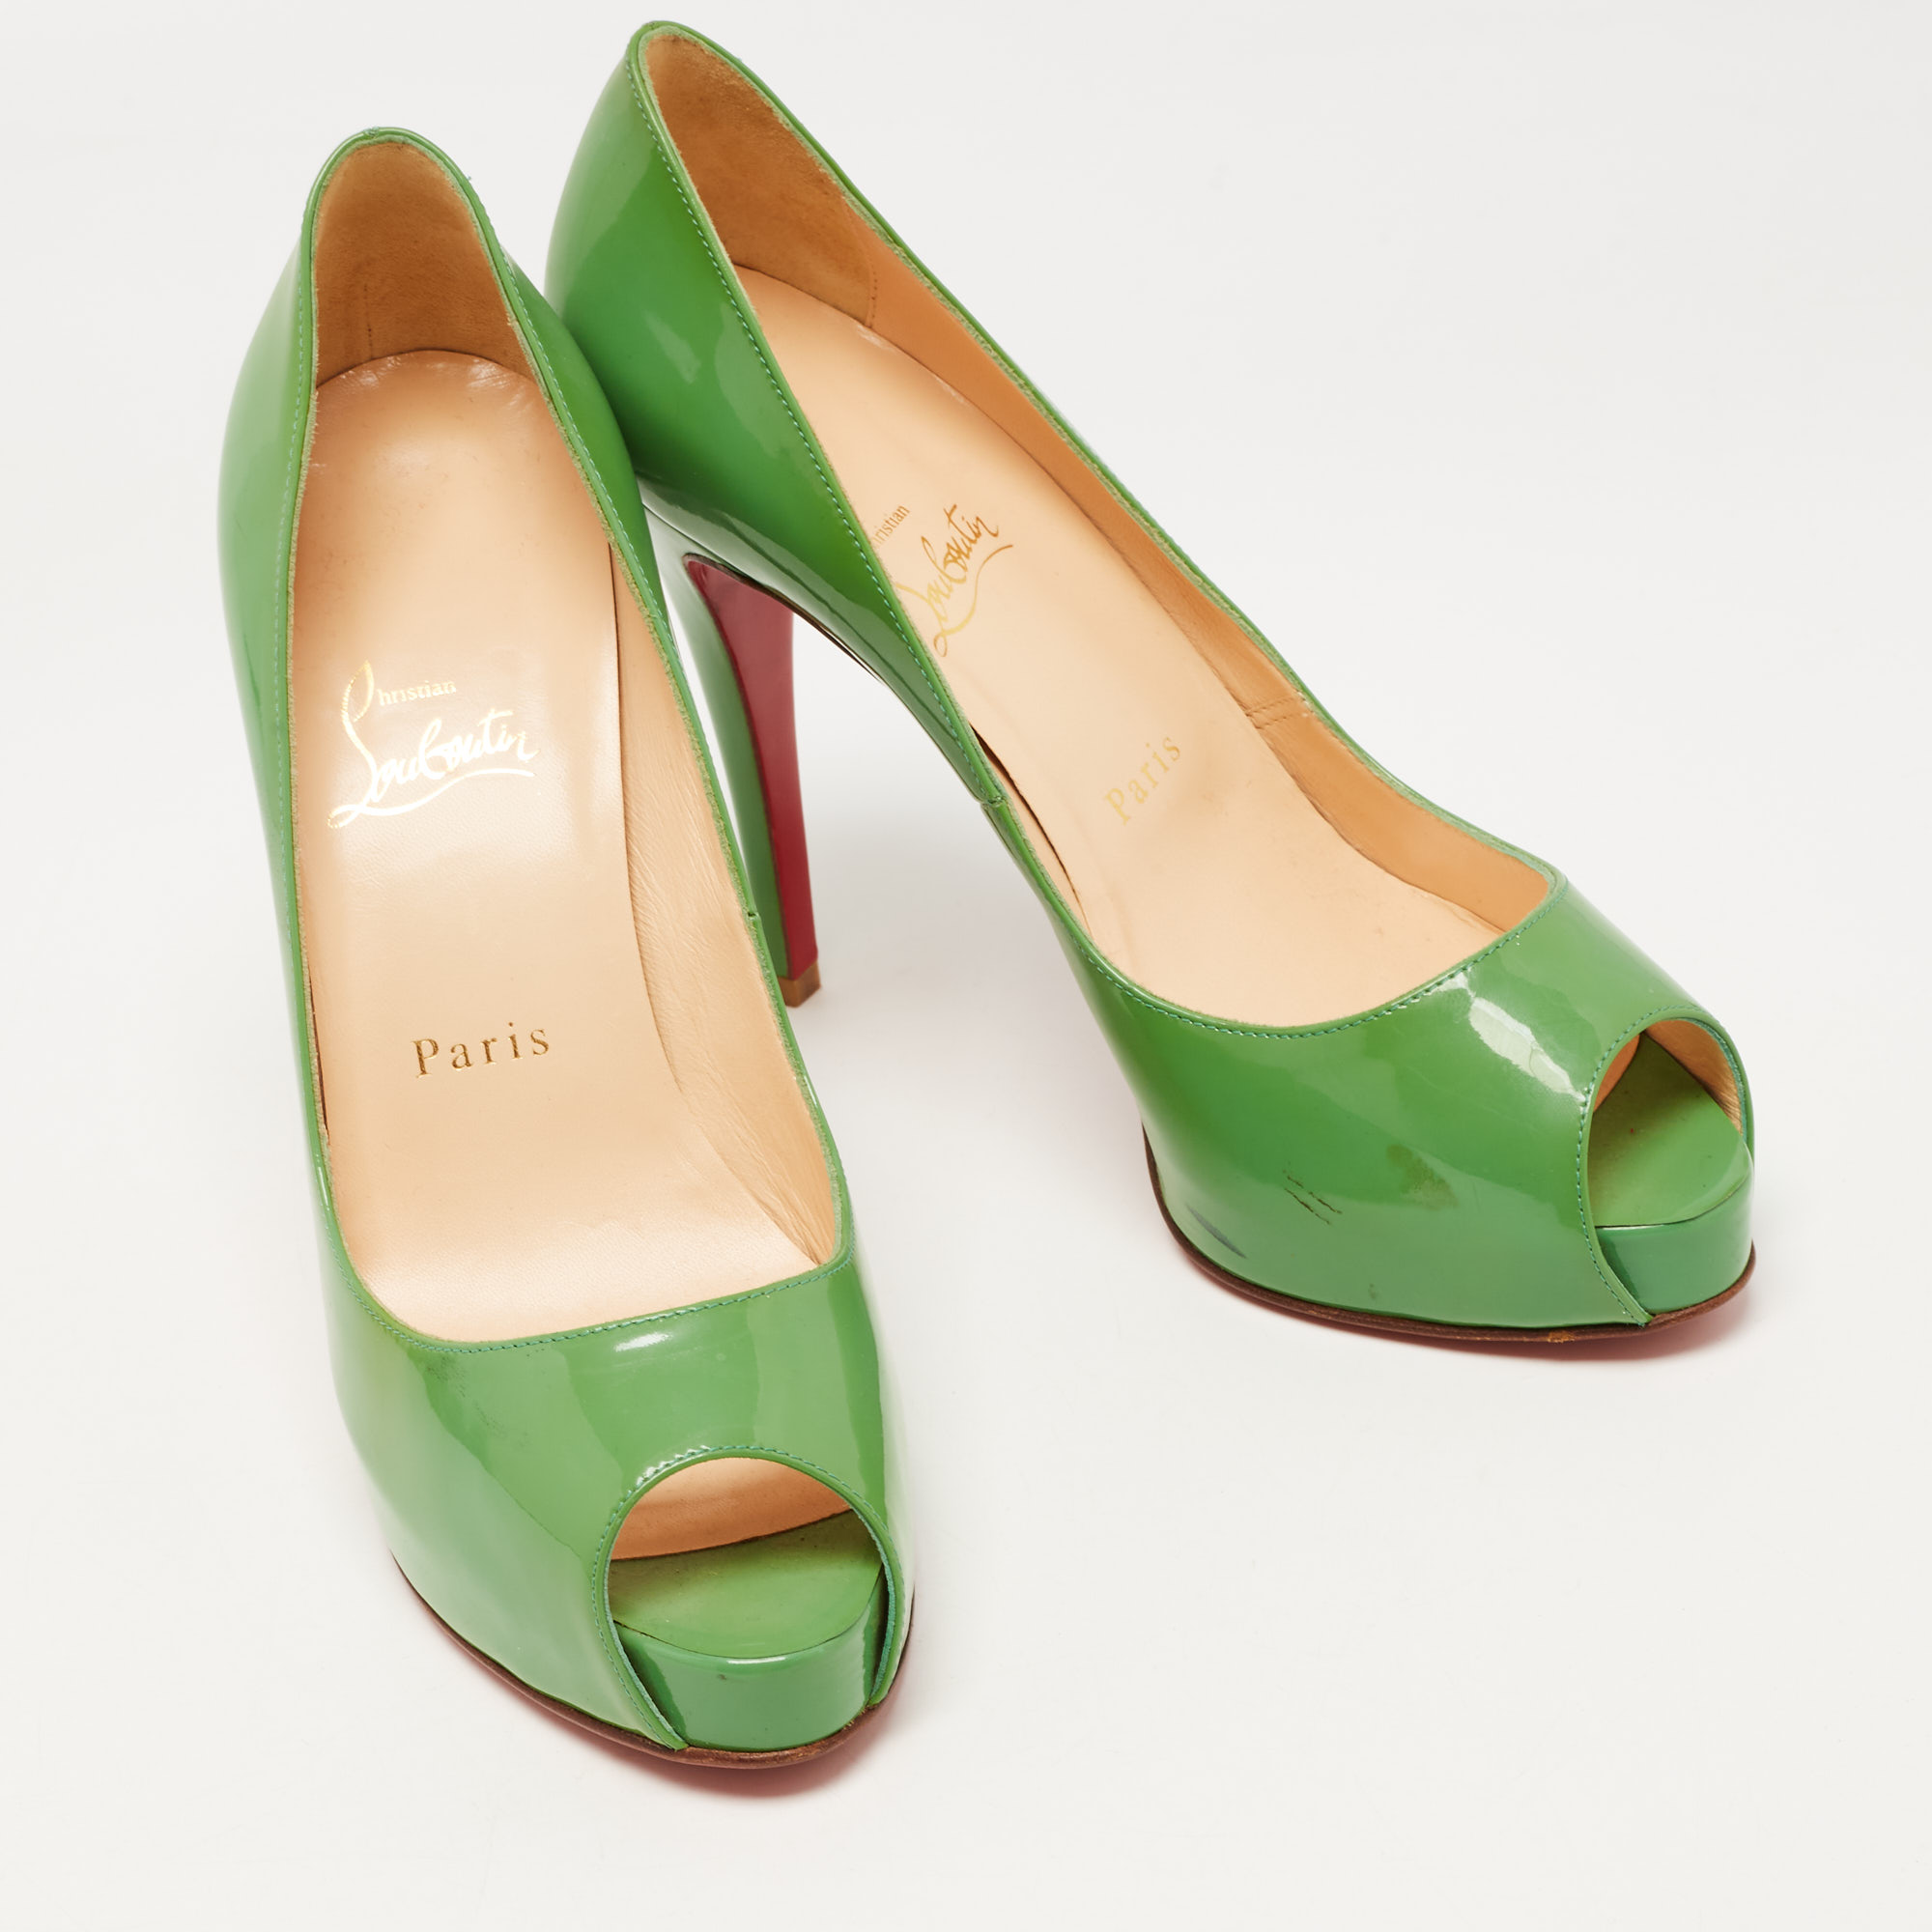 Christian Louboutin Green Patent Leather Very Prive Pumps Size 38.5